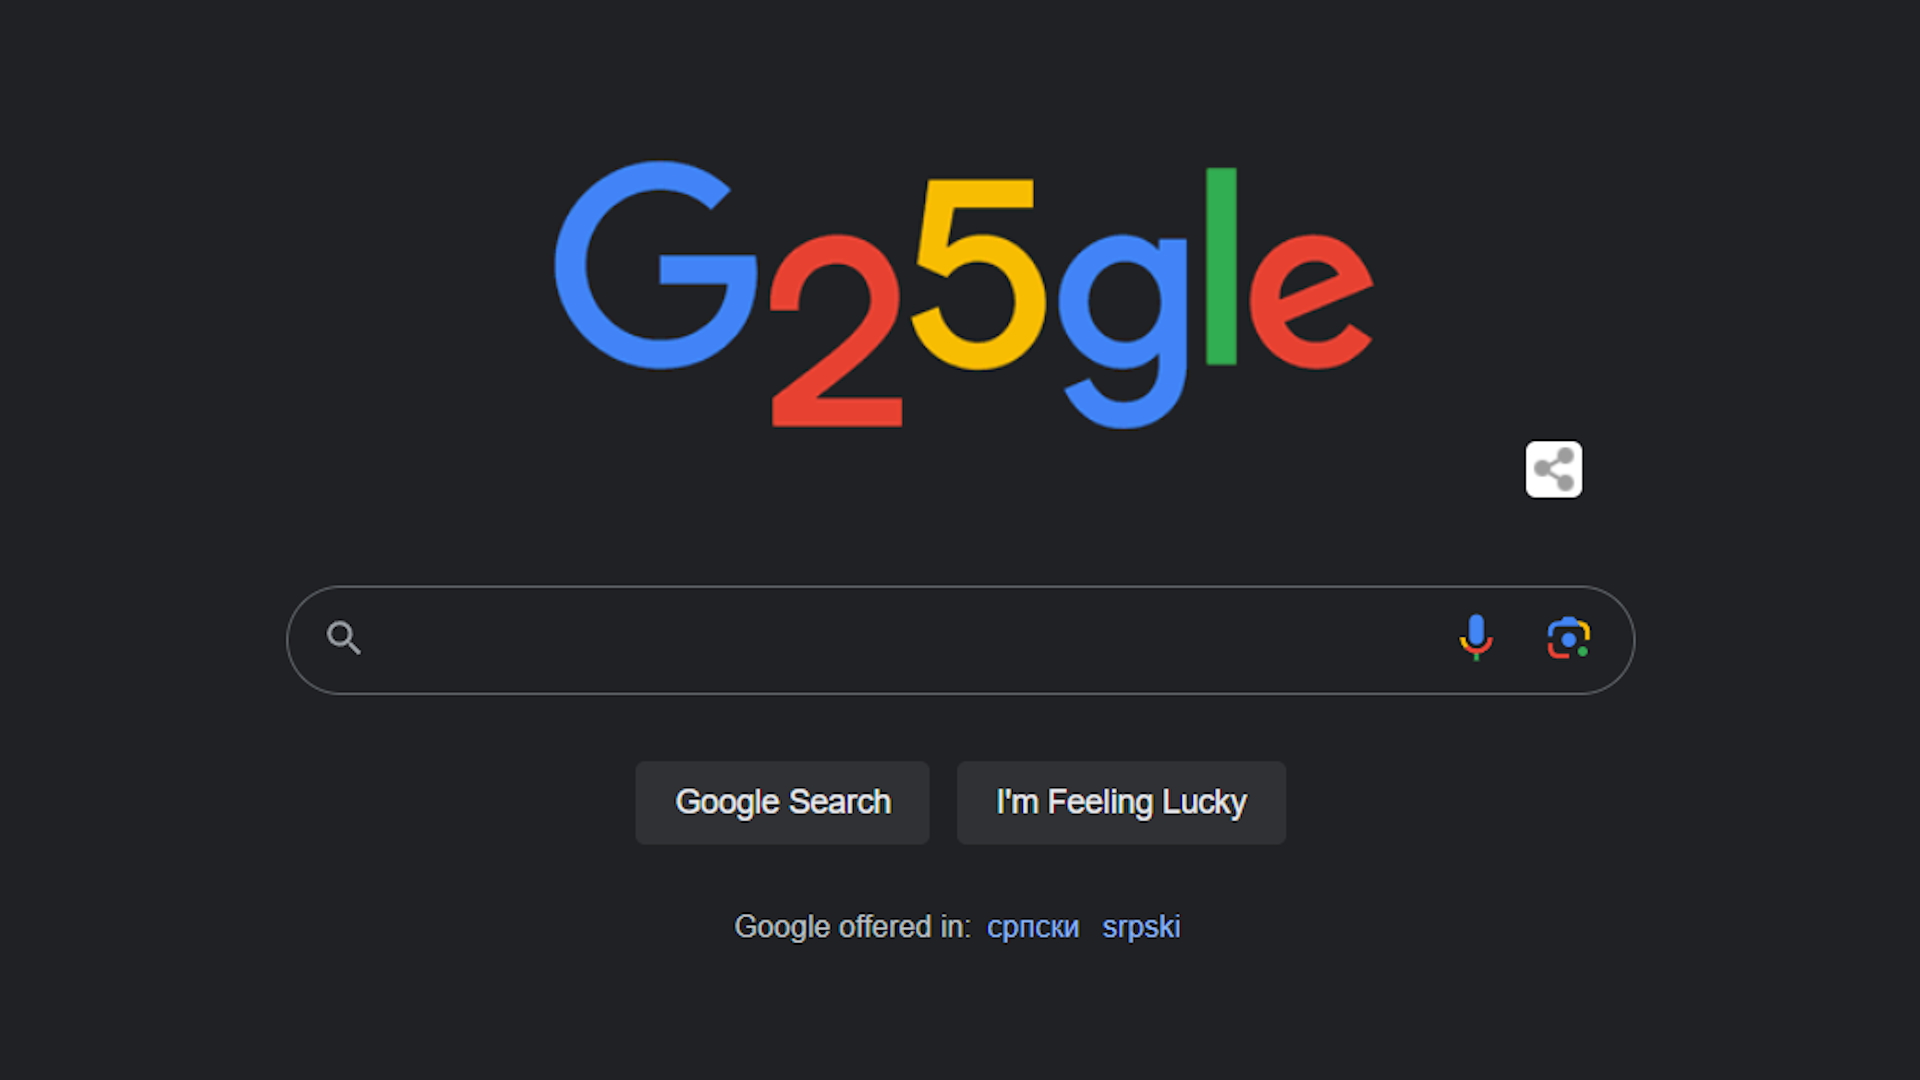 Google celebrates 25 years of existence, today a special G25gle logo on the browser